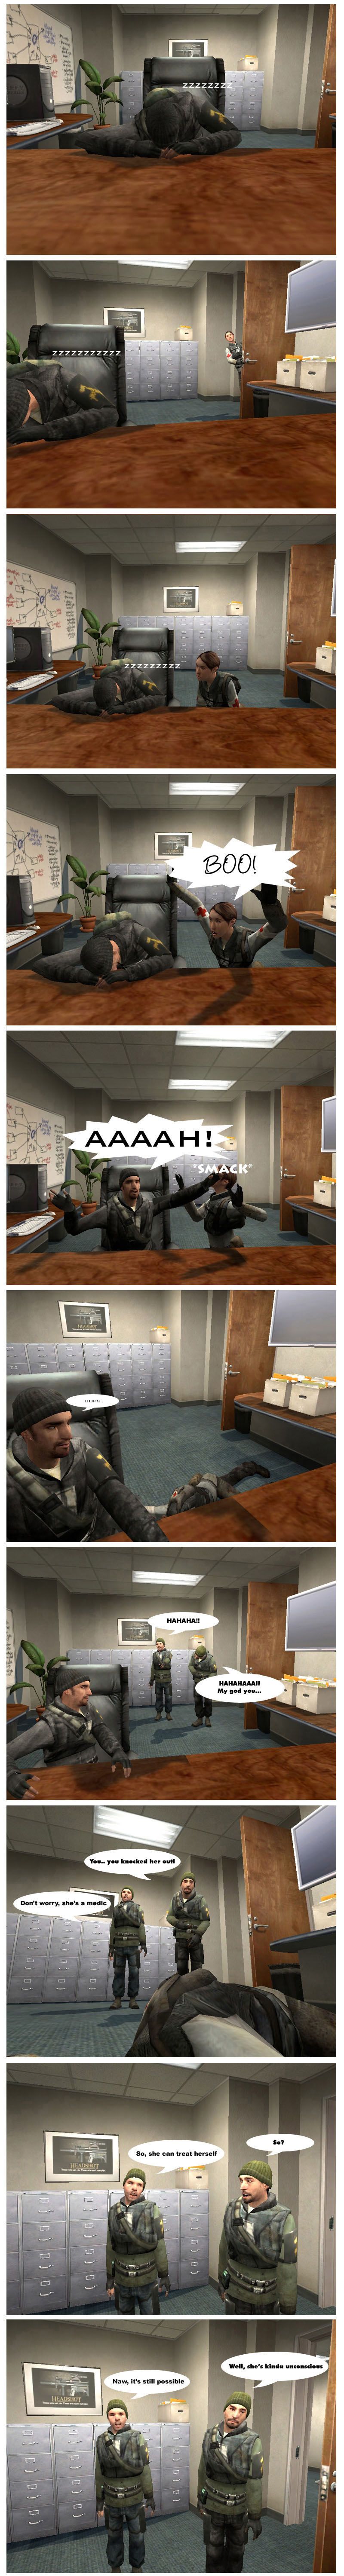 Jeff is sound asleep on an office desk. Jennifer peeks into the room, then slowly walks up to Jeff. She then screams boo, startling him awake. Jeff accidentally hits her in the head as he screams, then looks at Jennifer's unconscious body and says oops. John and Jerry then enter the room laughing at Jeff, then realize Jeff knocked Jennifer out. Jerry tells John not to worry because she's a medic. John asks Jerry so and Jerry tells him she can treat herself. John points out she's kinda unconscious but Jerry insists it's still possible.